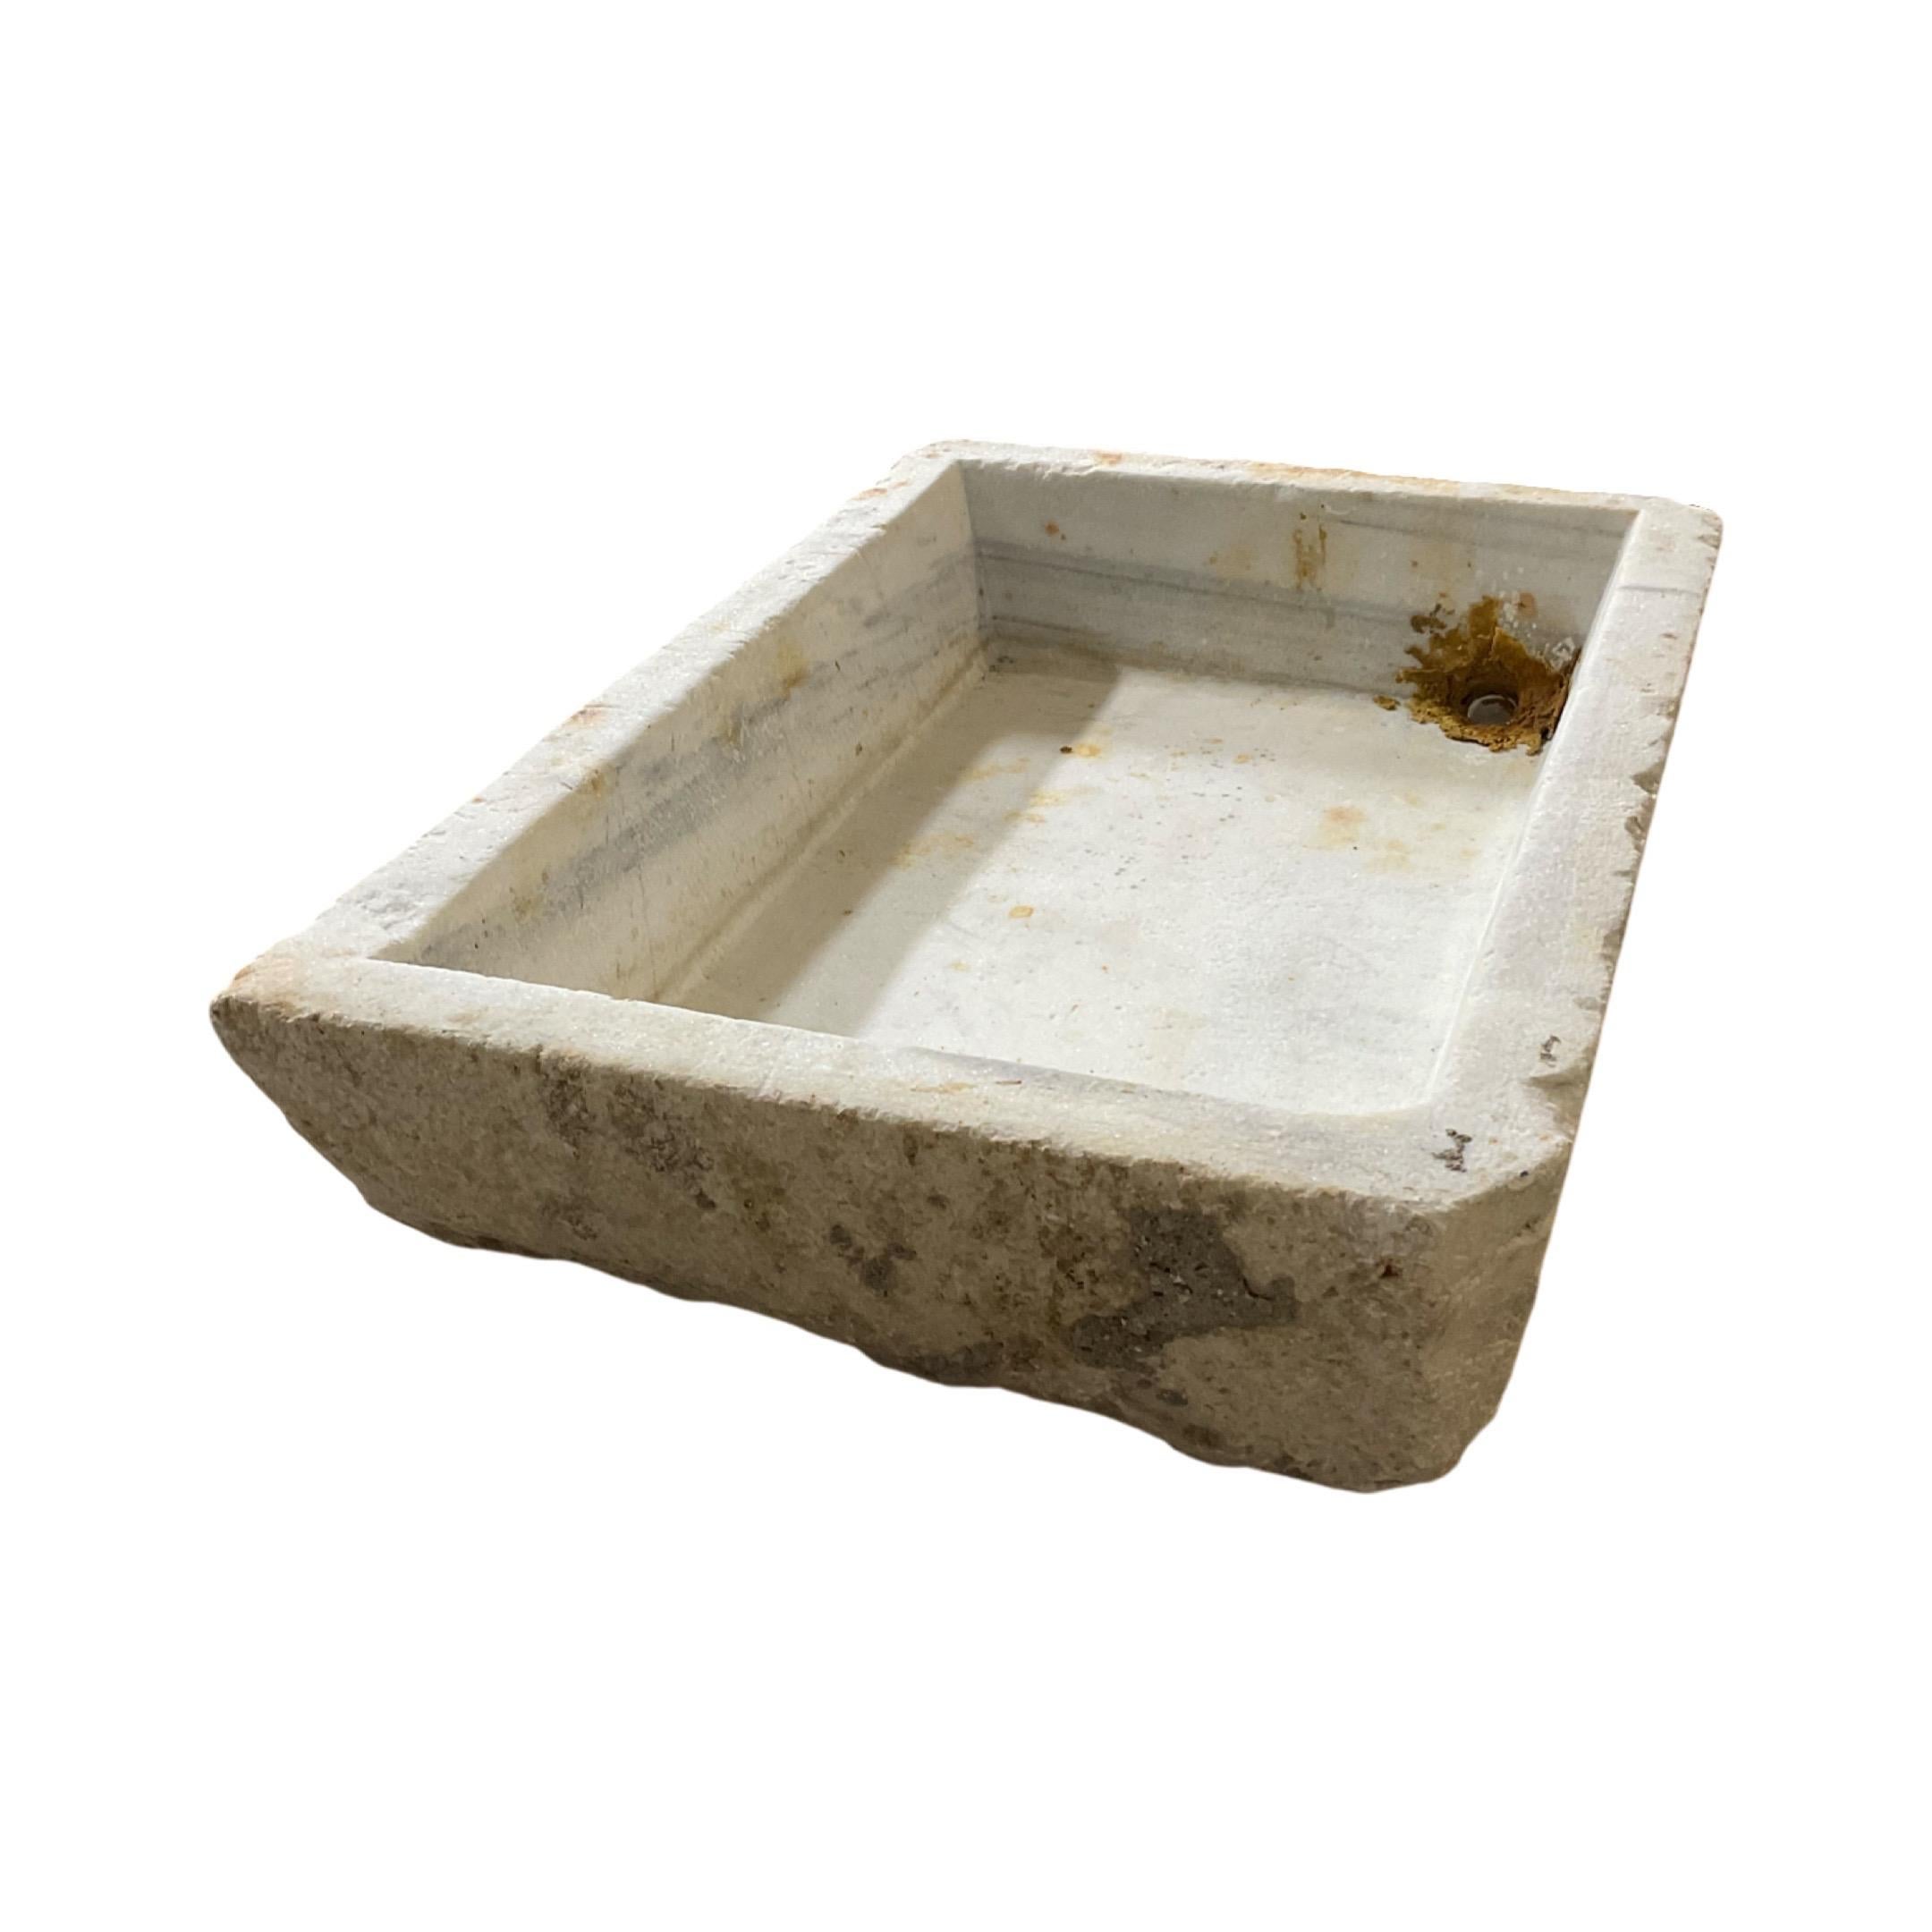 This French White Marble Sink is a luxurious 17th century piece of art crafted from French white marble. It comes with a hole predrilled for drainage, but can be covered to create a sealed sink look. Enjoy the look of the past in your home with this